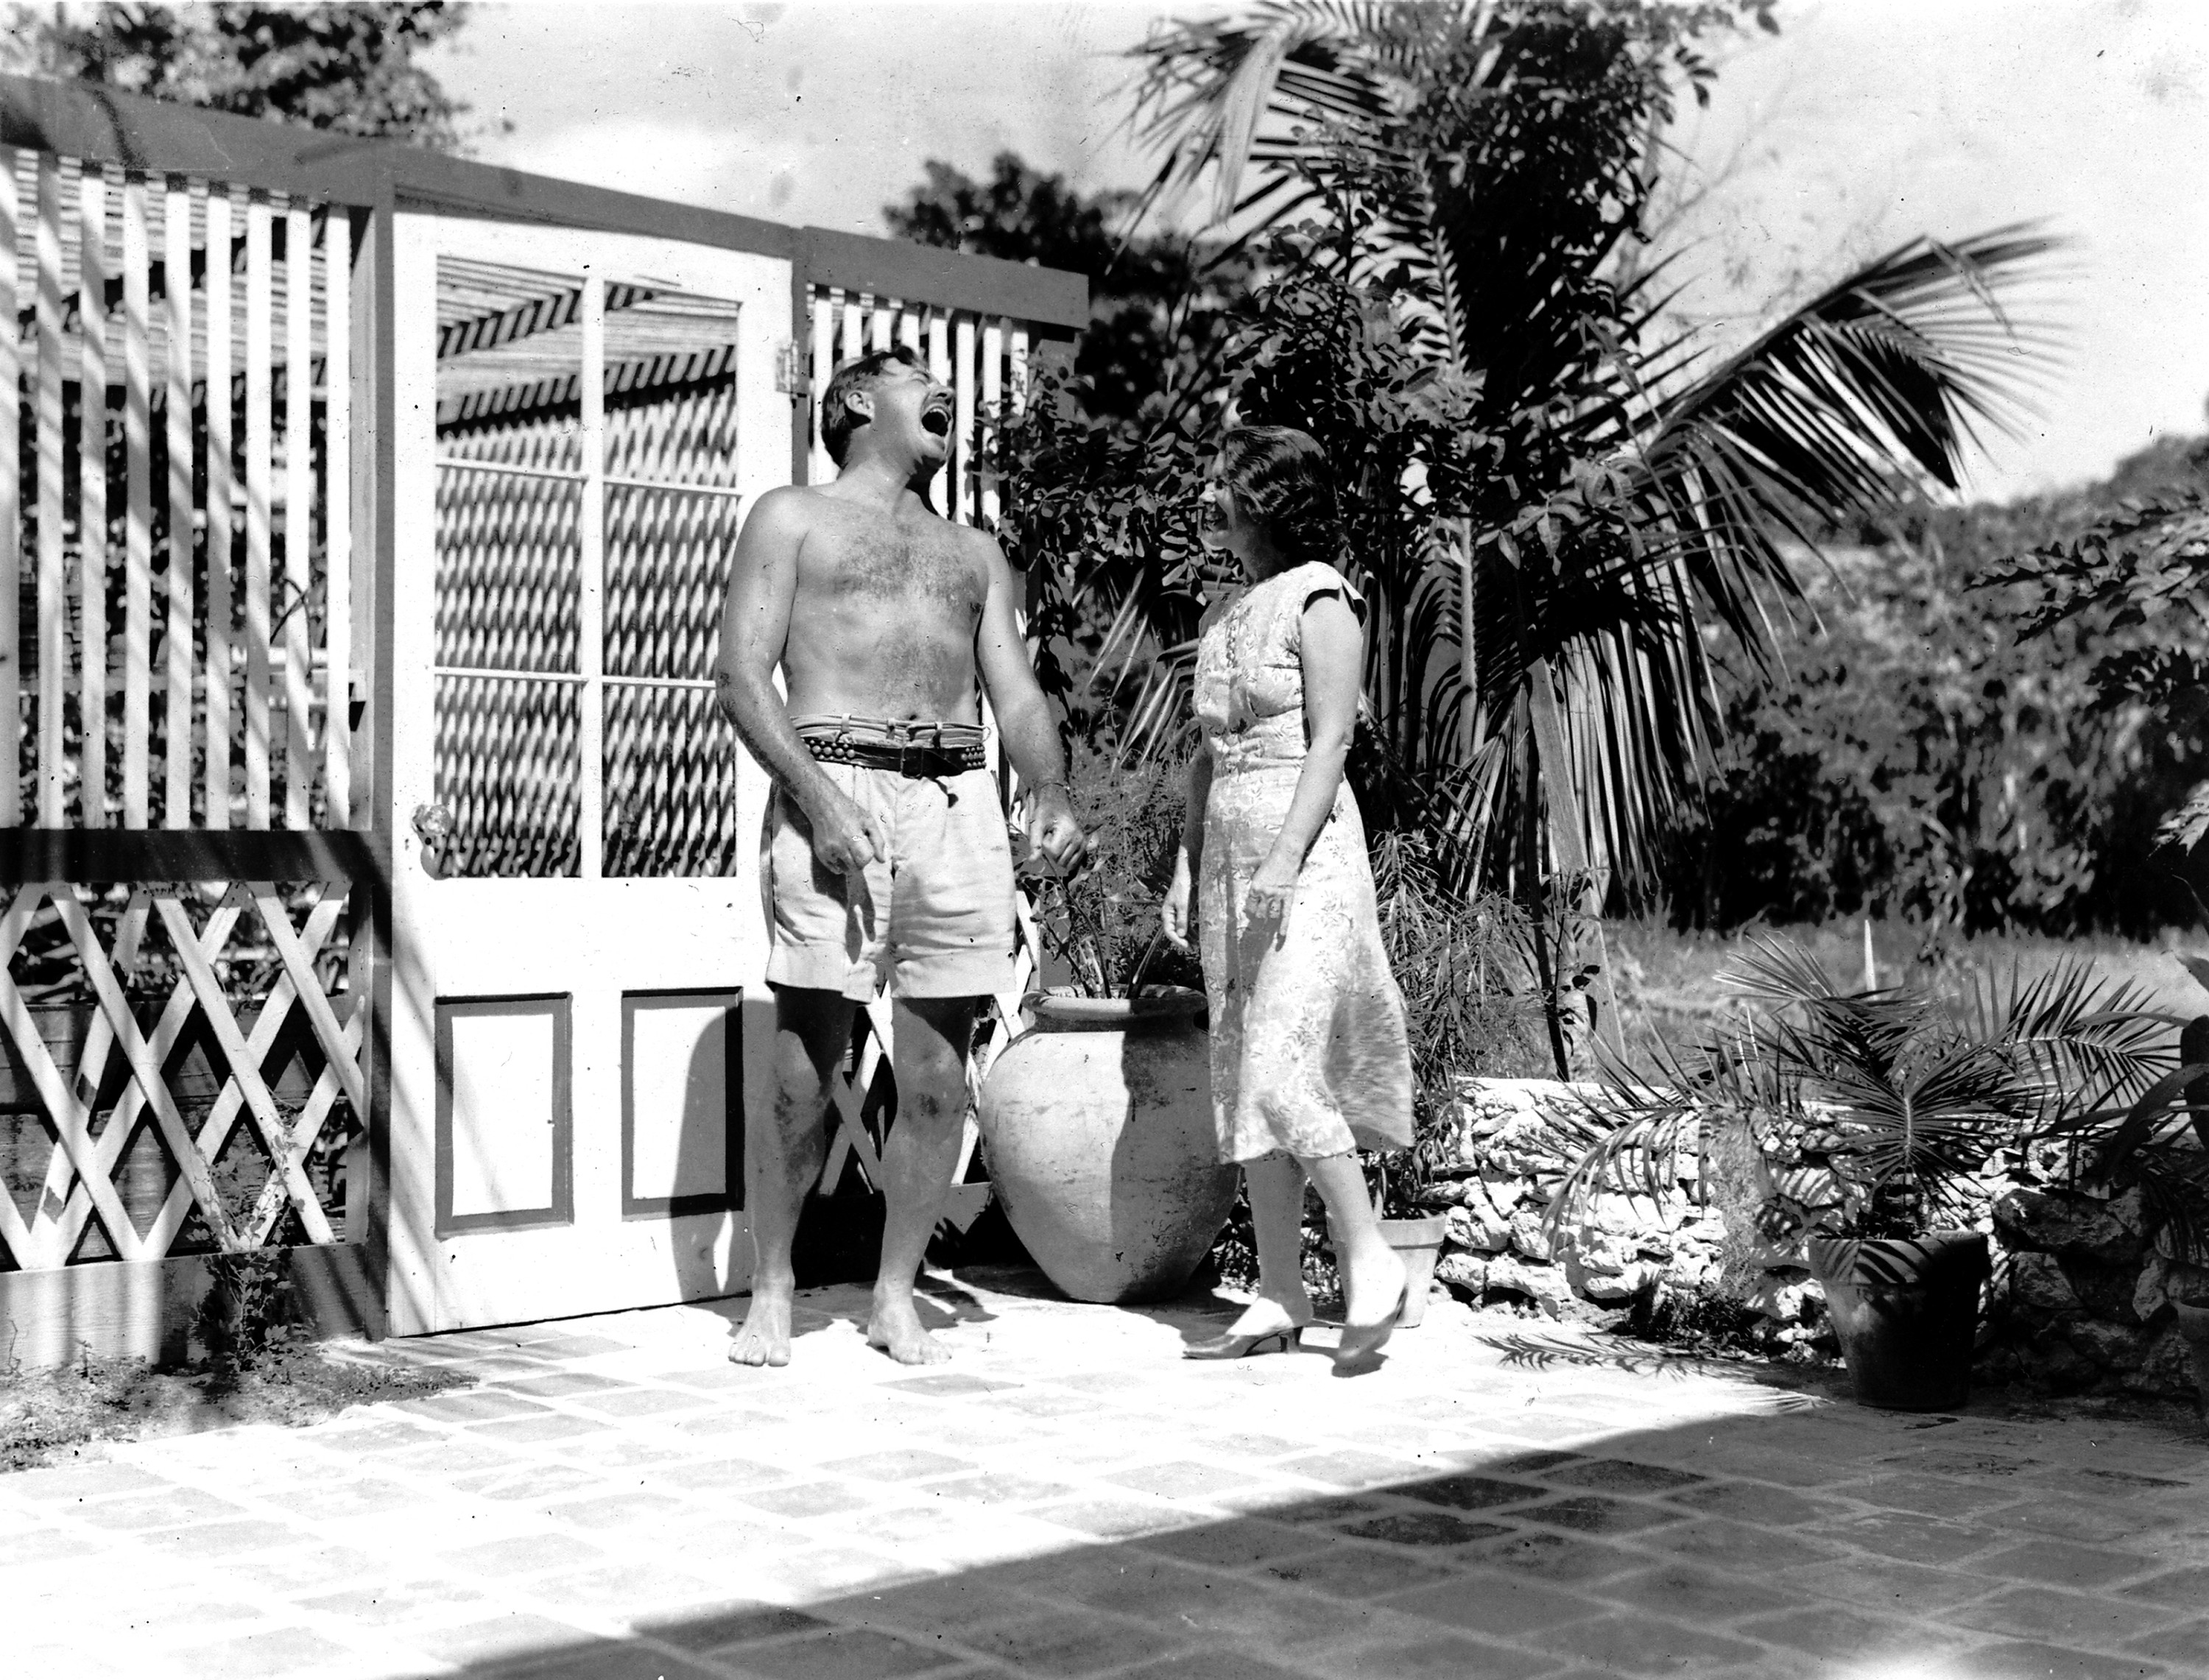 A black and white image of Ernest and Pauline Hemingway laughing by their home in Key West.  Ernest wears only shorts and a belt; Pauline wears a sleeveless dress and flat shoes.  Ernest's head is thrown back in laughter, Pauline laughs, looking at him.  They stand on a tiled patio next to a palm tree.